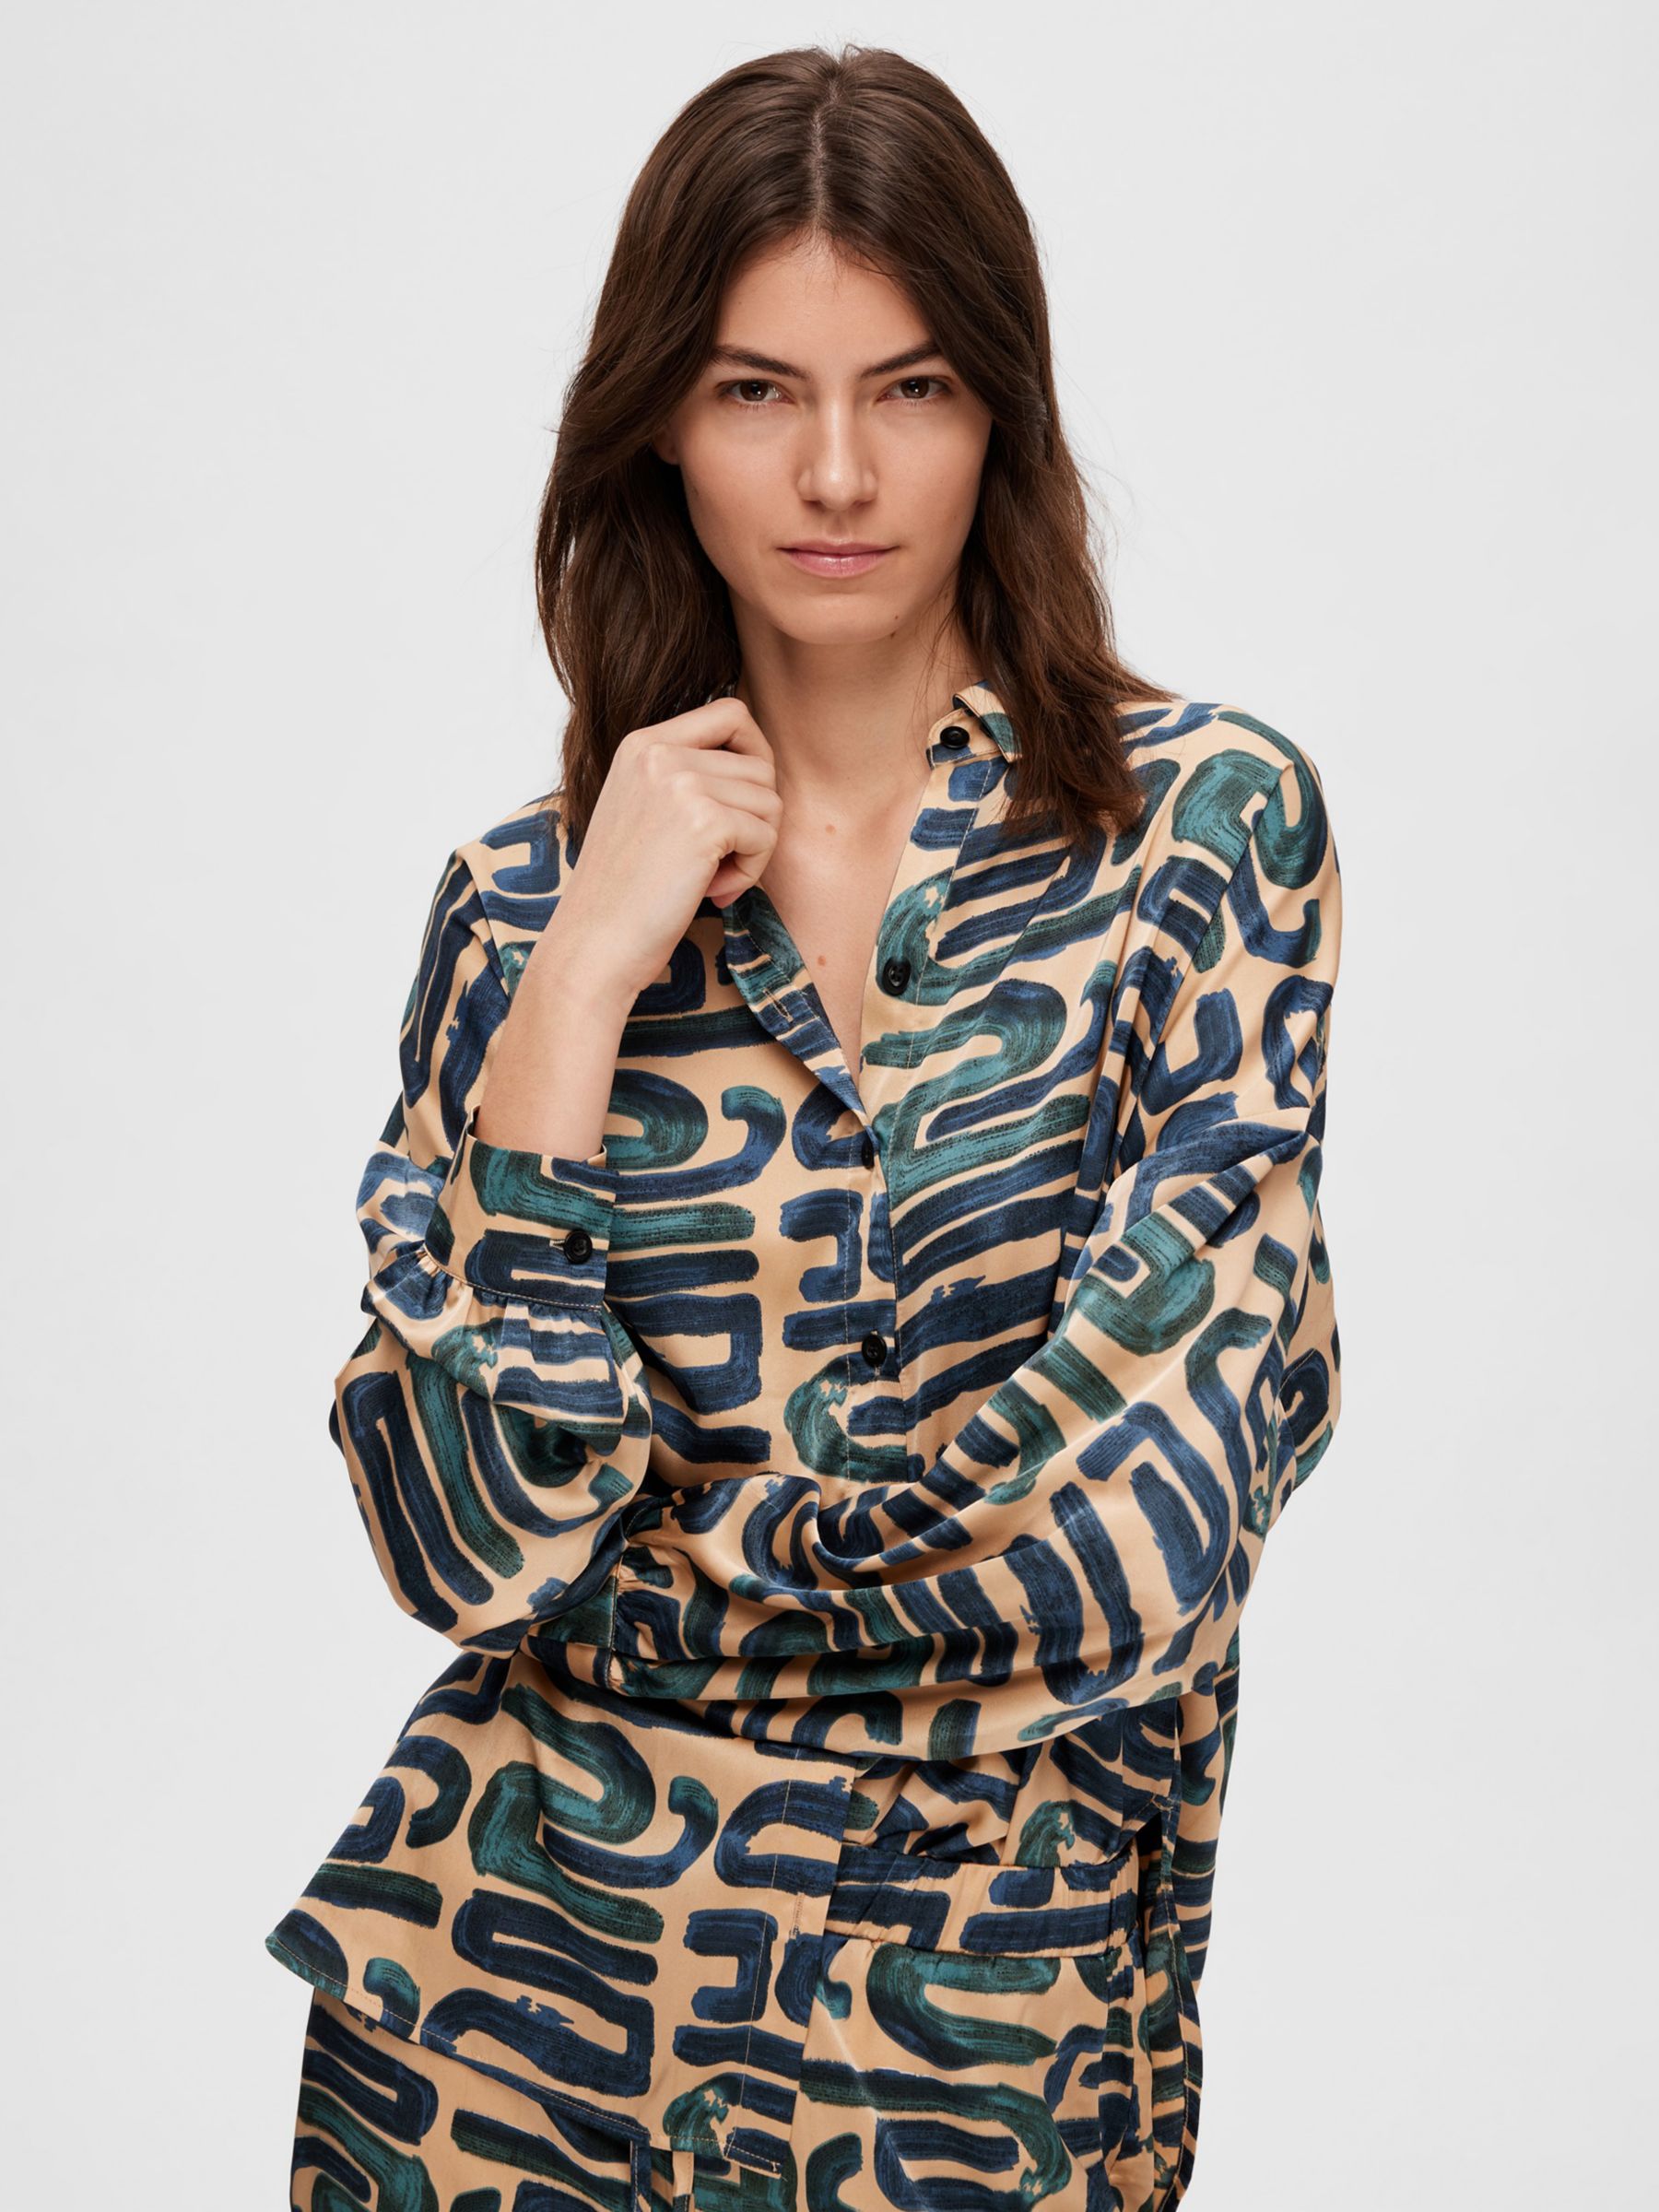 Buy SELECTED FEMME Abstract Print Trousers, Almond Buff Online at johnlewis.com